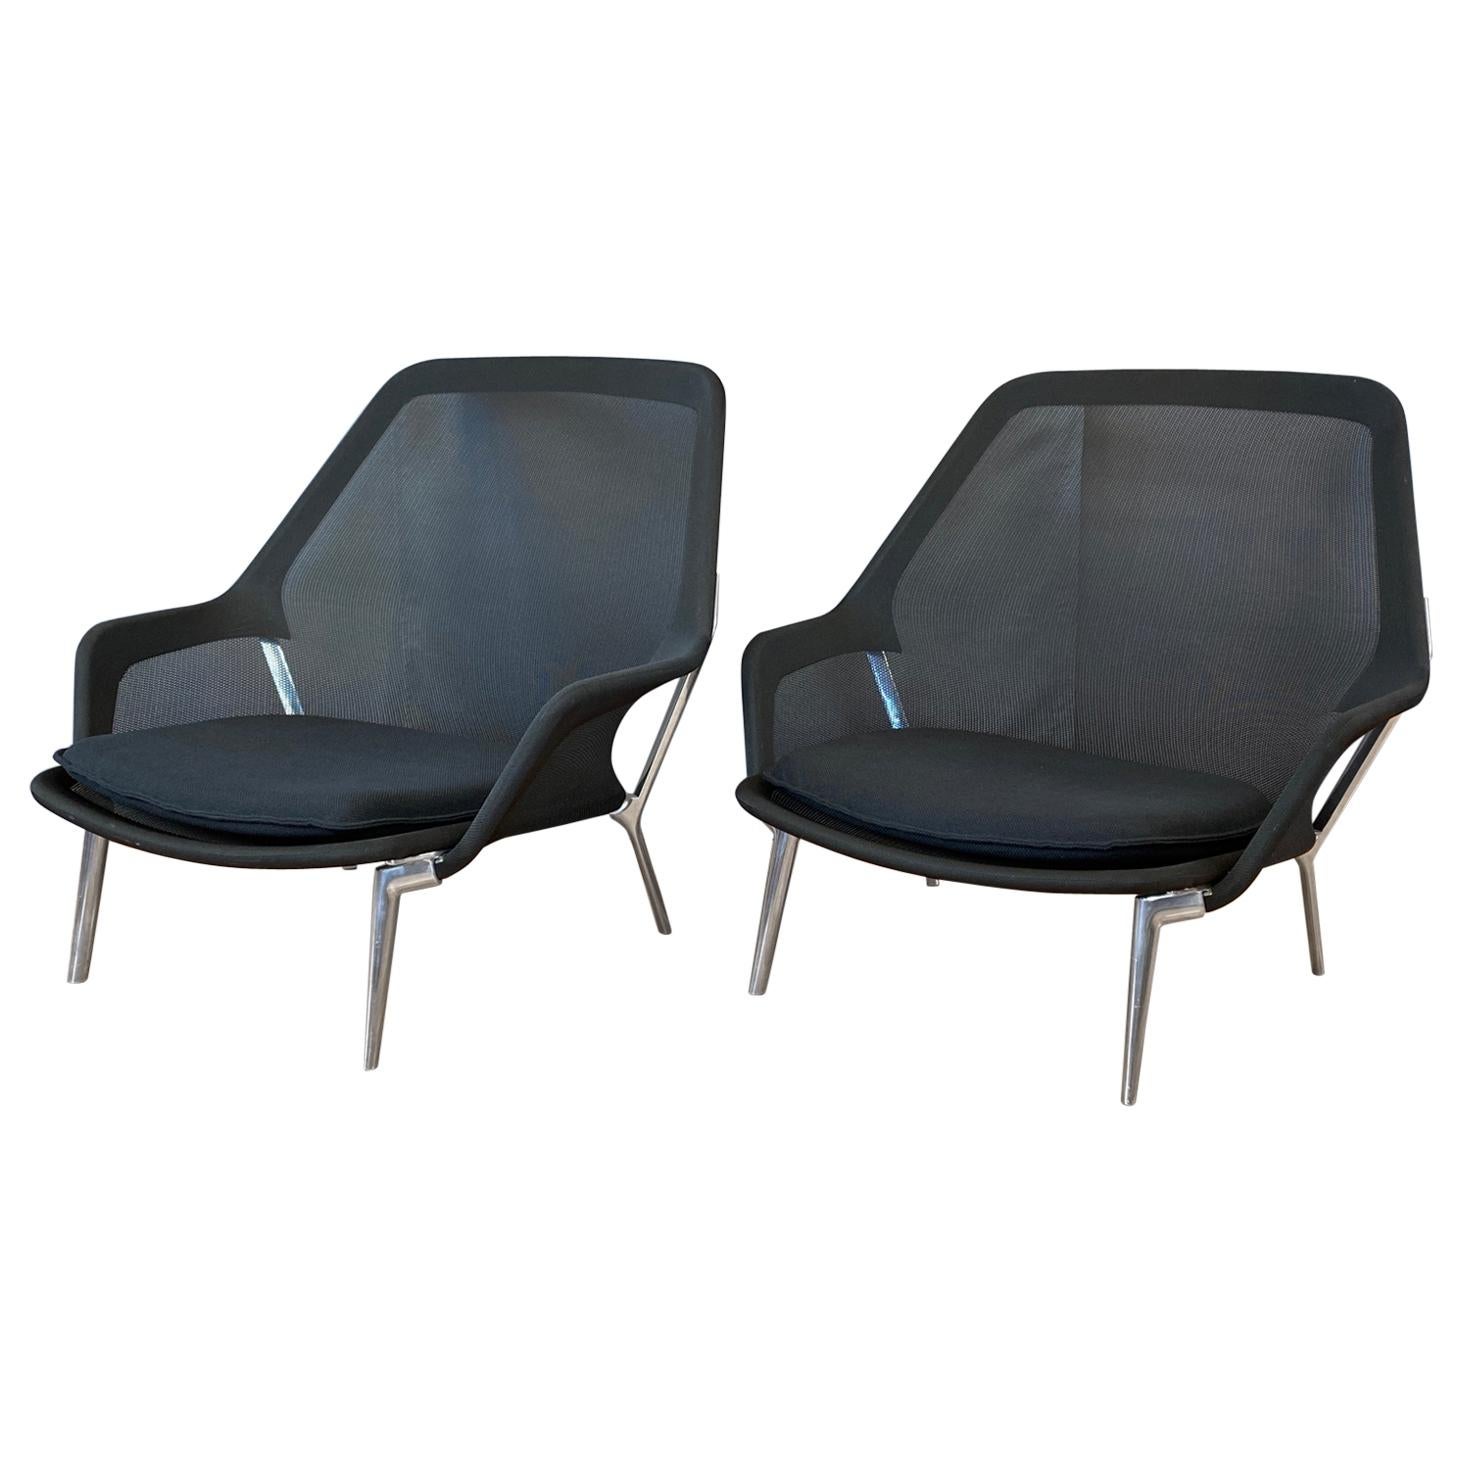 Pair of Black Slow Chairs by Ronan and Erwan Bouroullec for Vitra